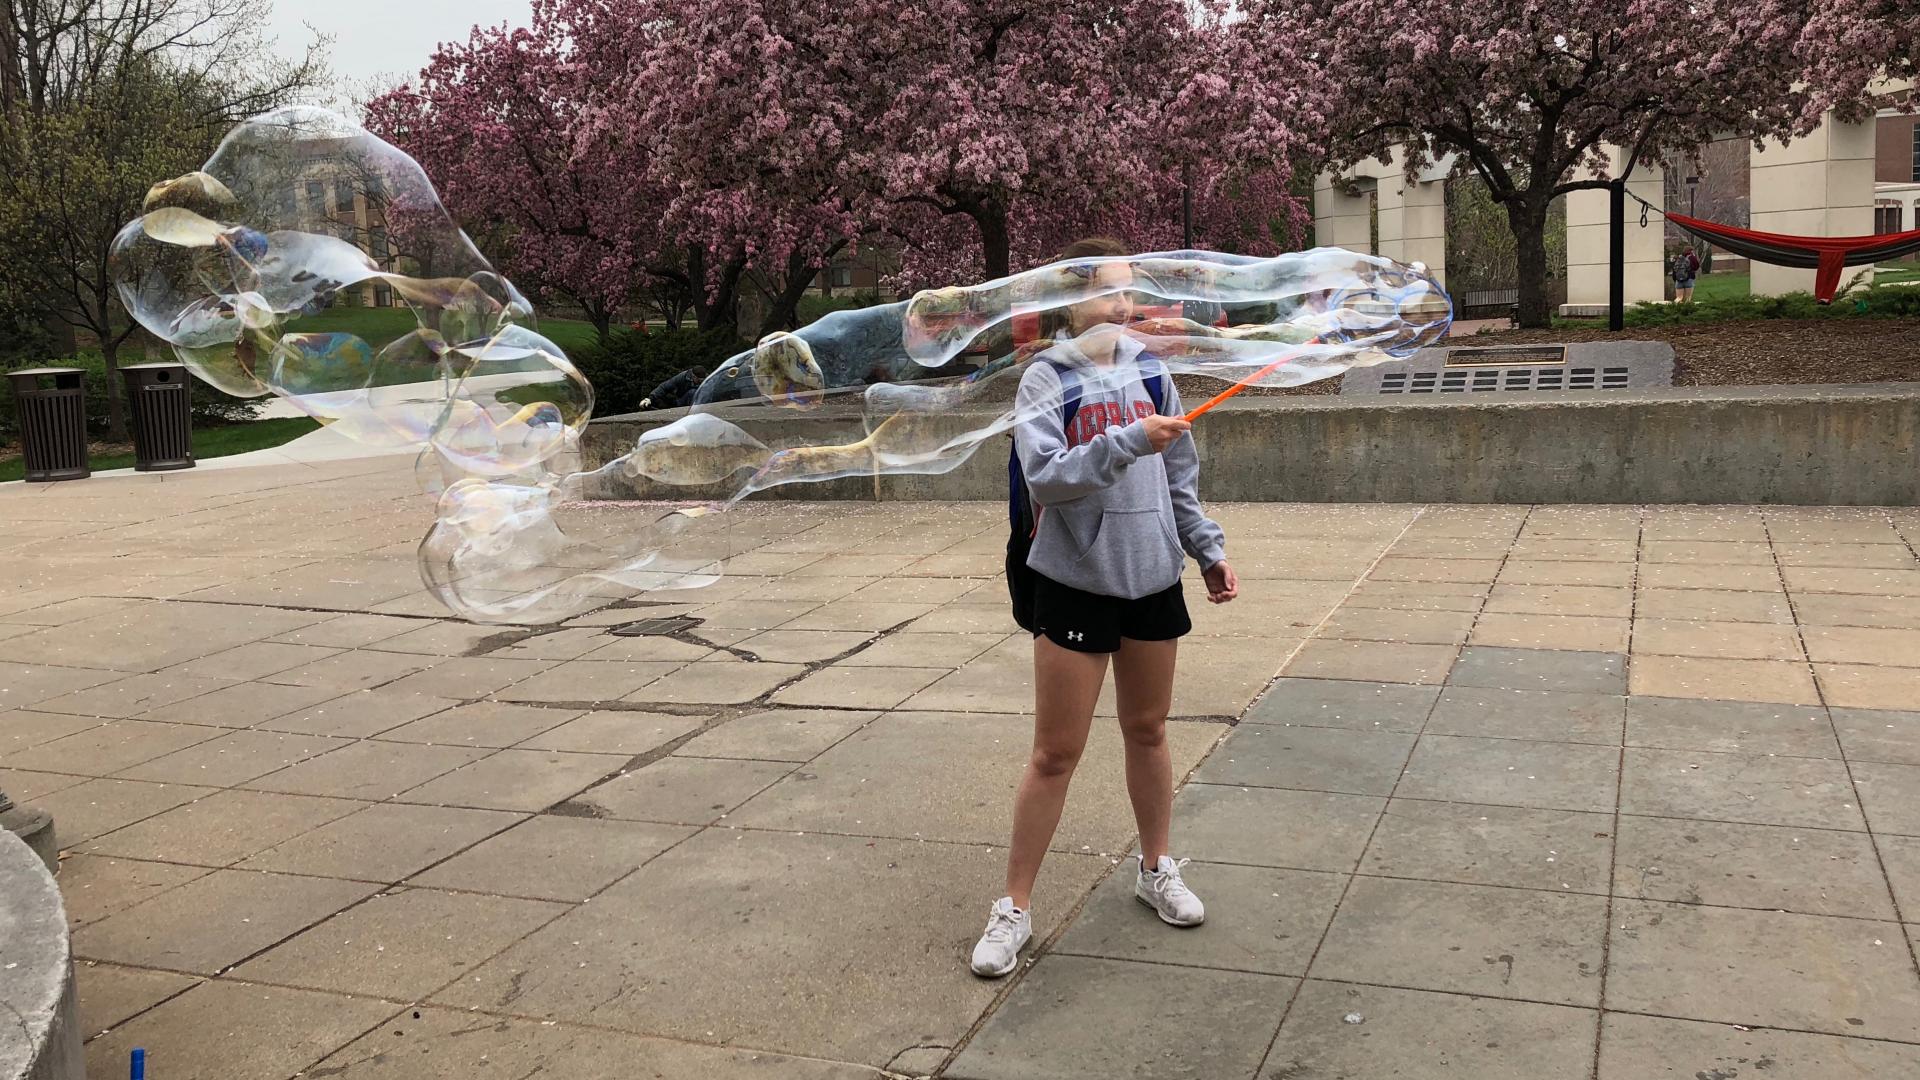 A student relaxes by blowing bubbles during finals week.